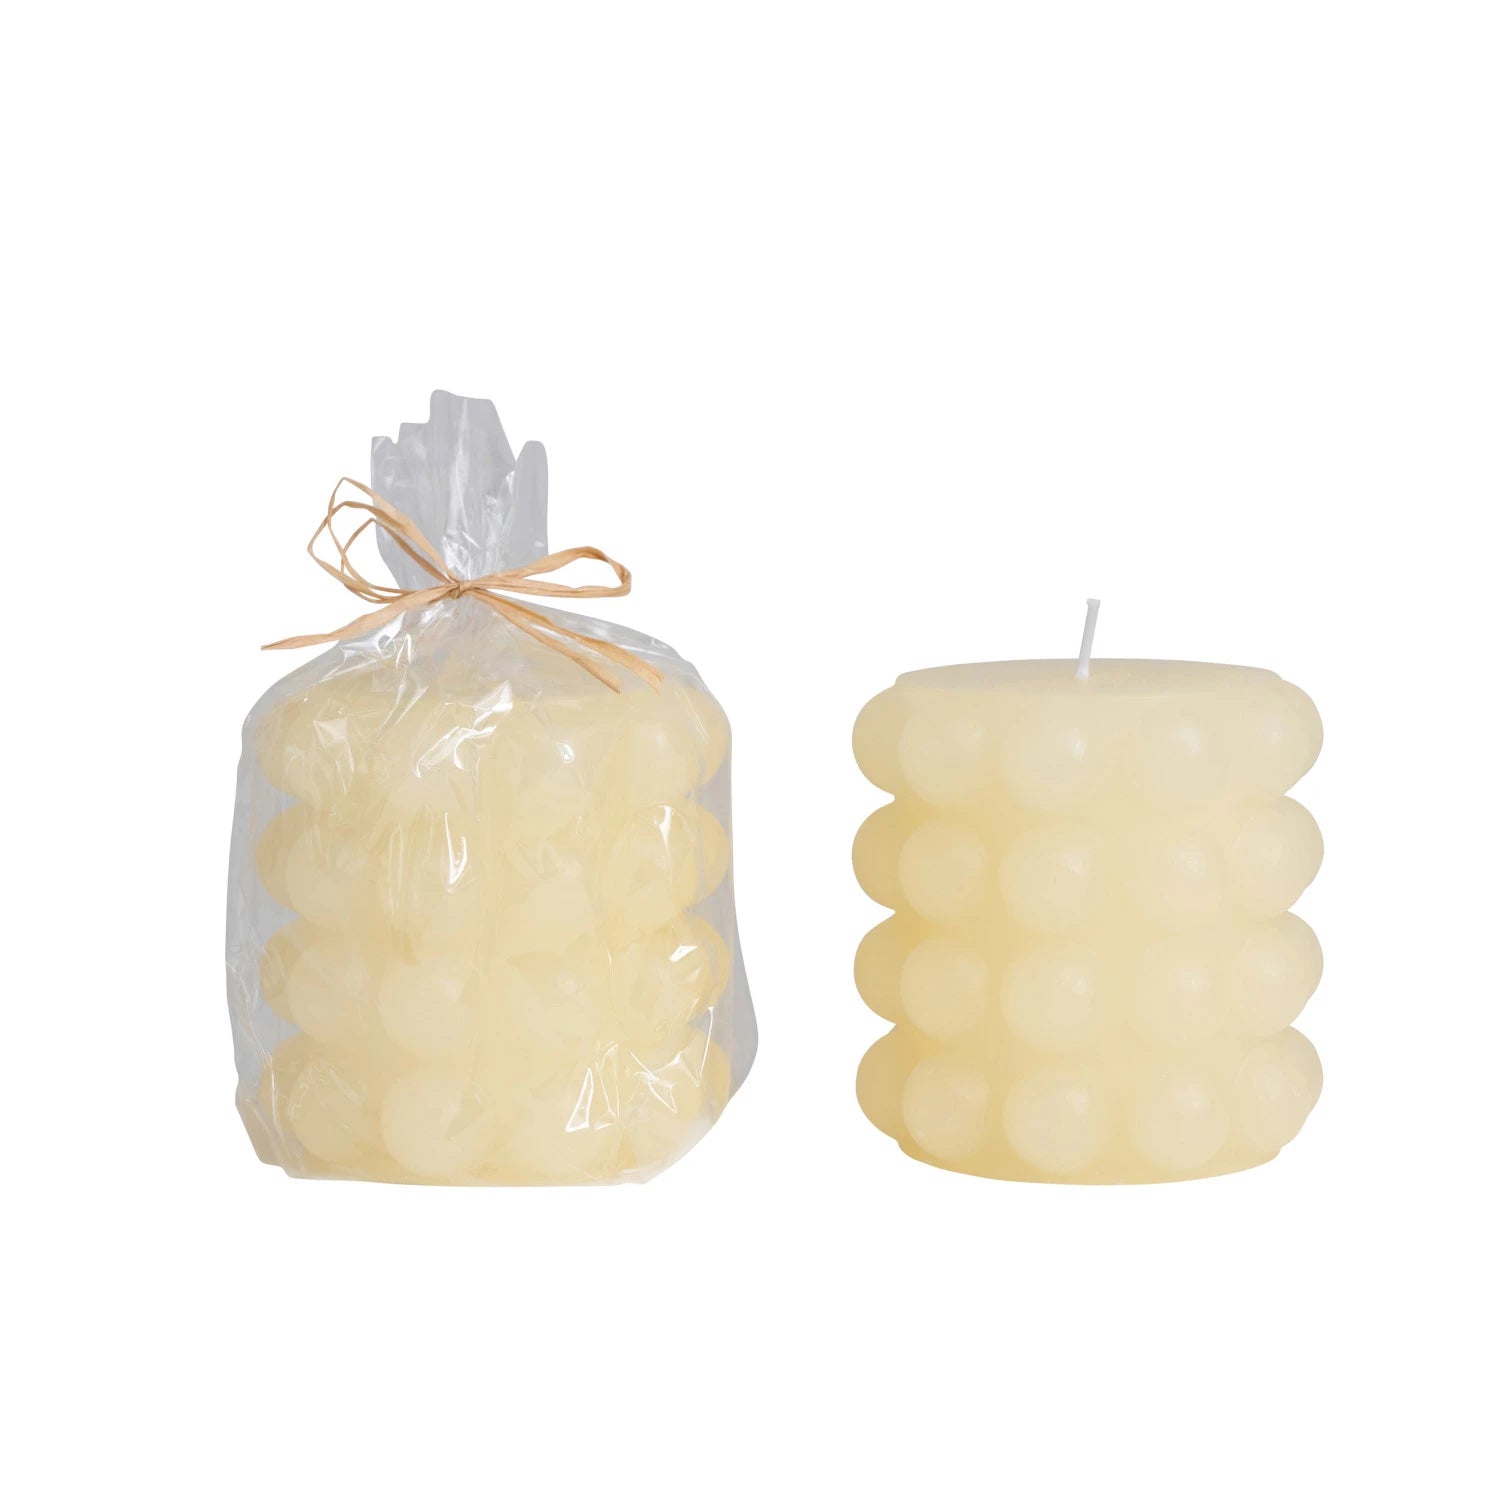 one small cream hobnail pillar candle in clear wrap with twine bow and one without the package on a white background